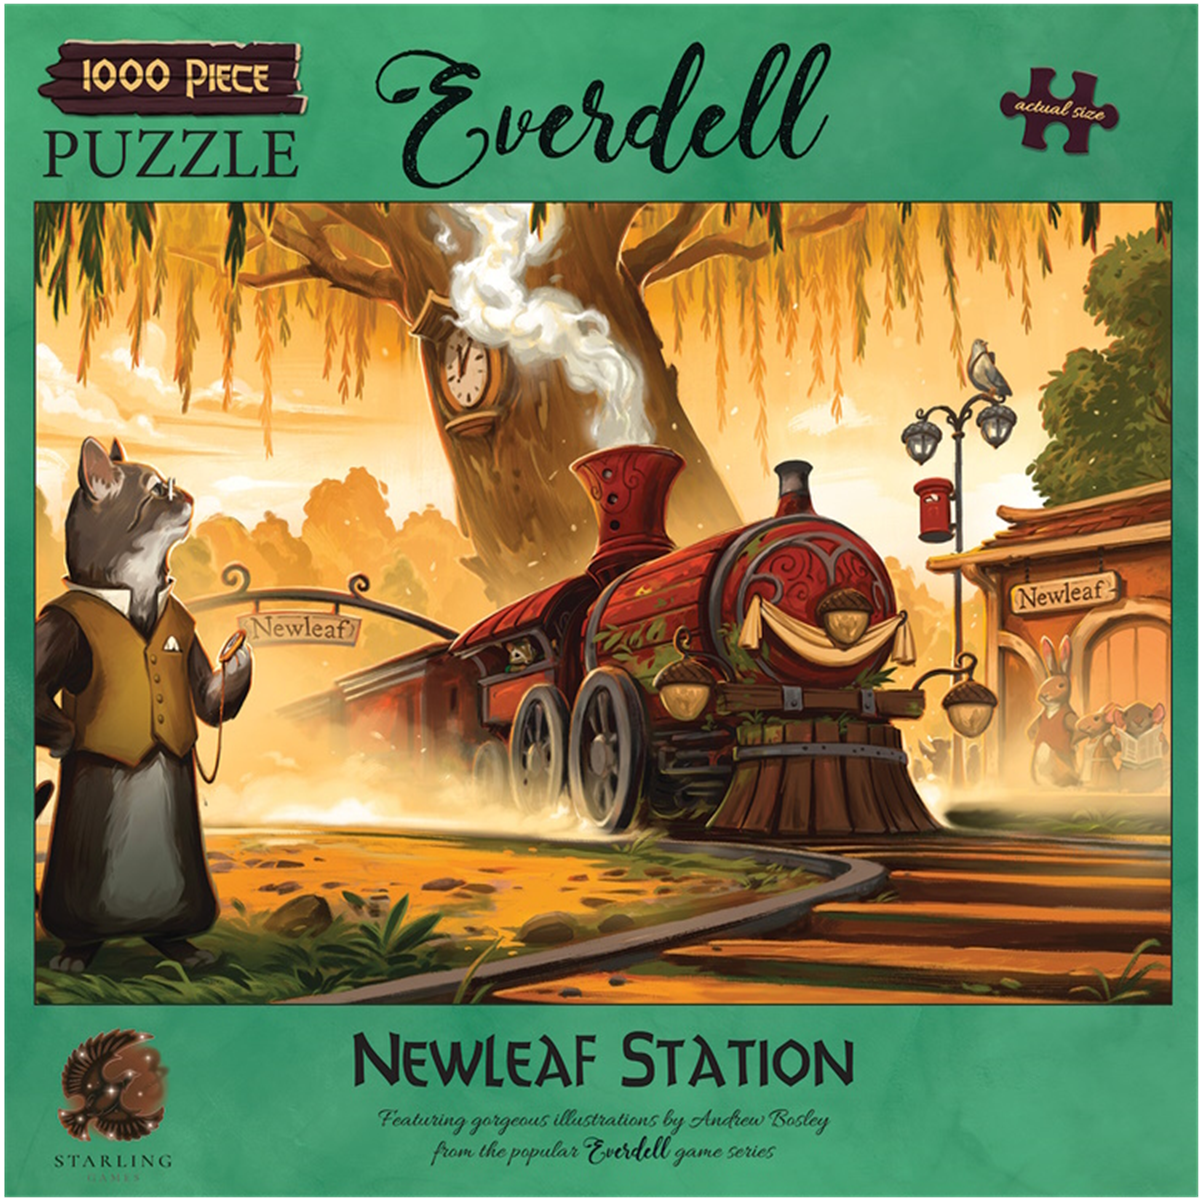 Everdell puzzle - Newleaf station